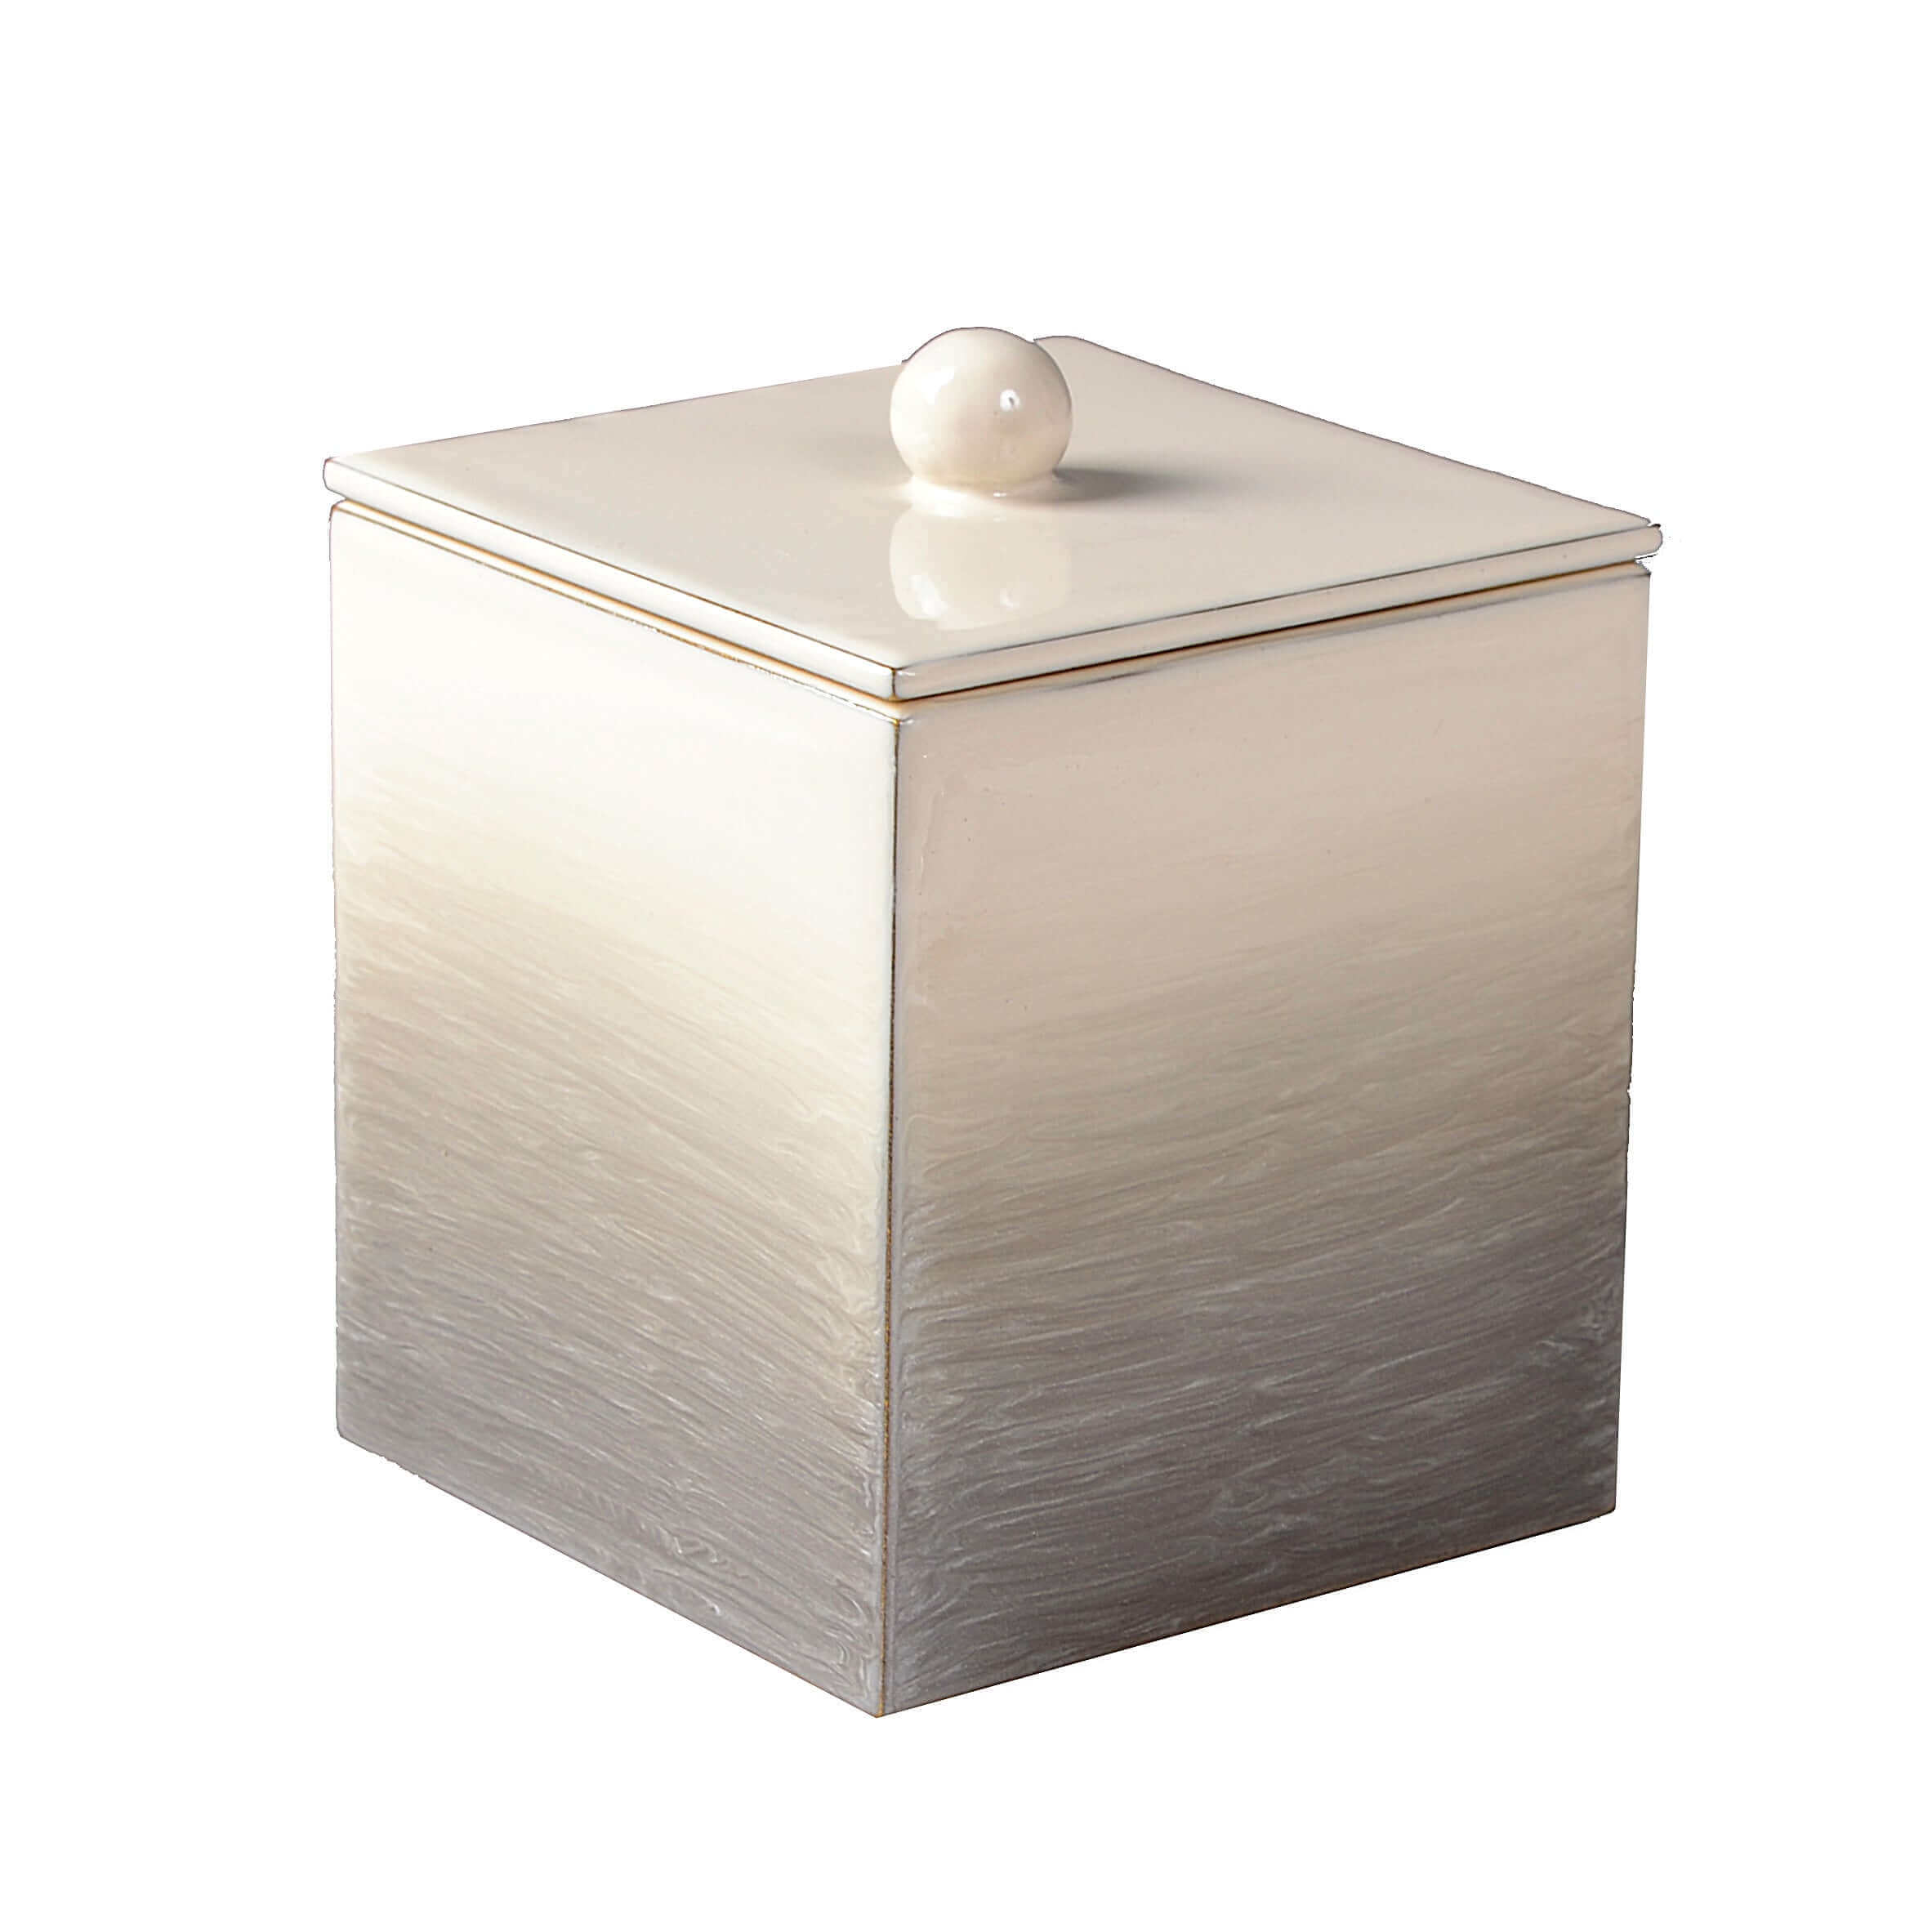 Mike + Ally - Ombre Container - 58034N - beige - 